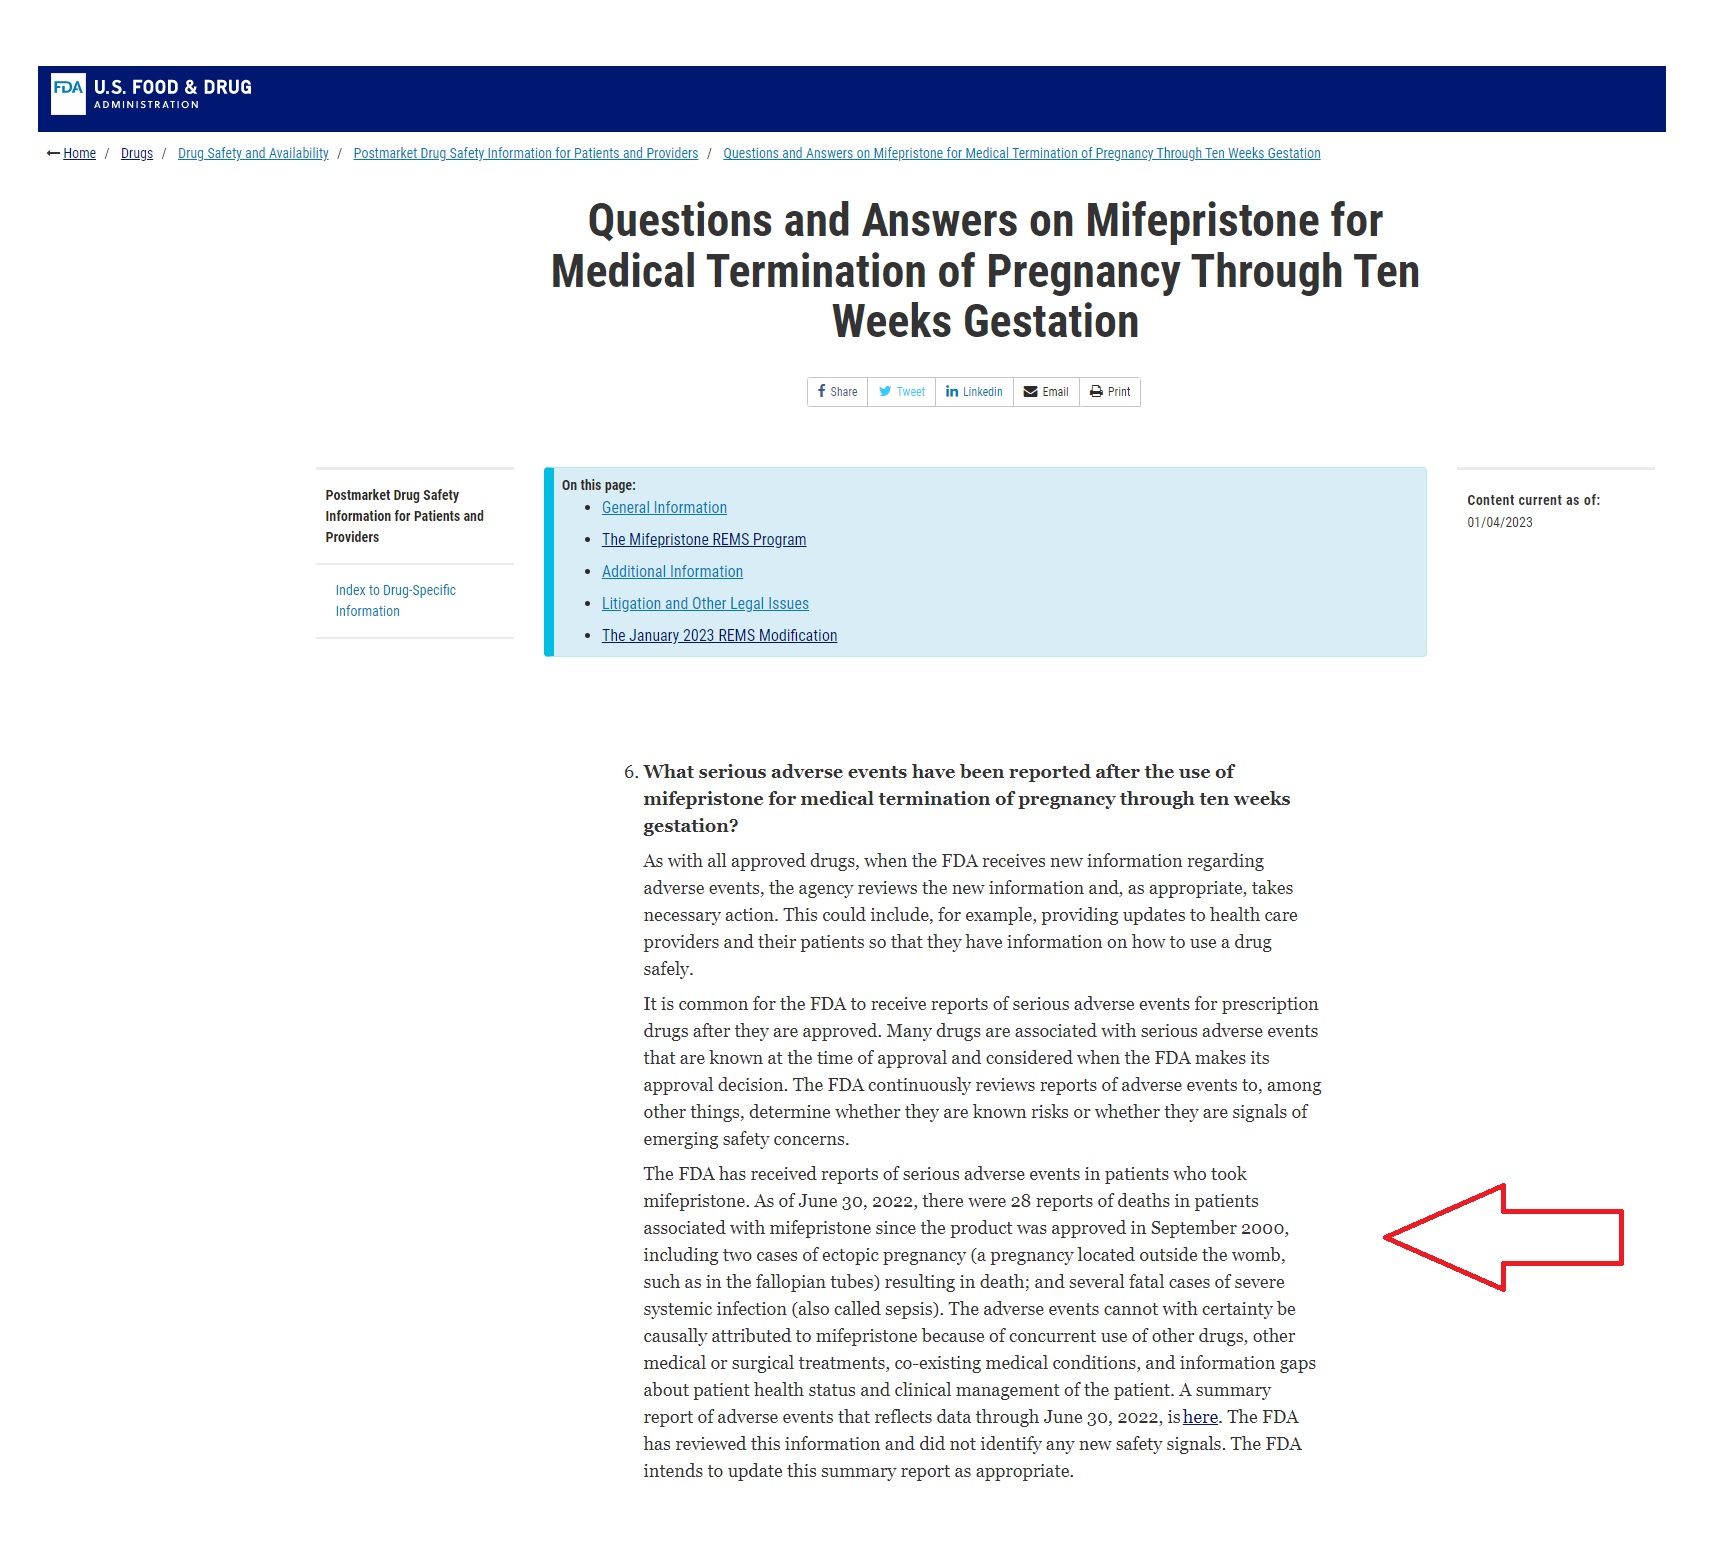 Image: Abortion pill deaths FDA website accessed 050123